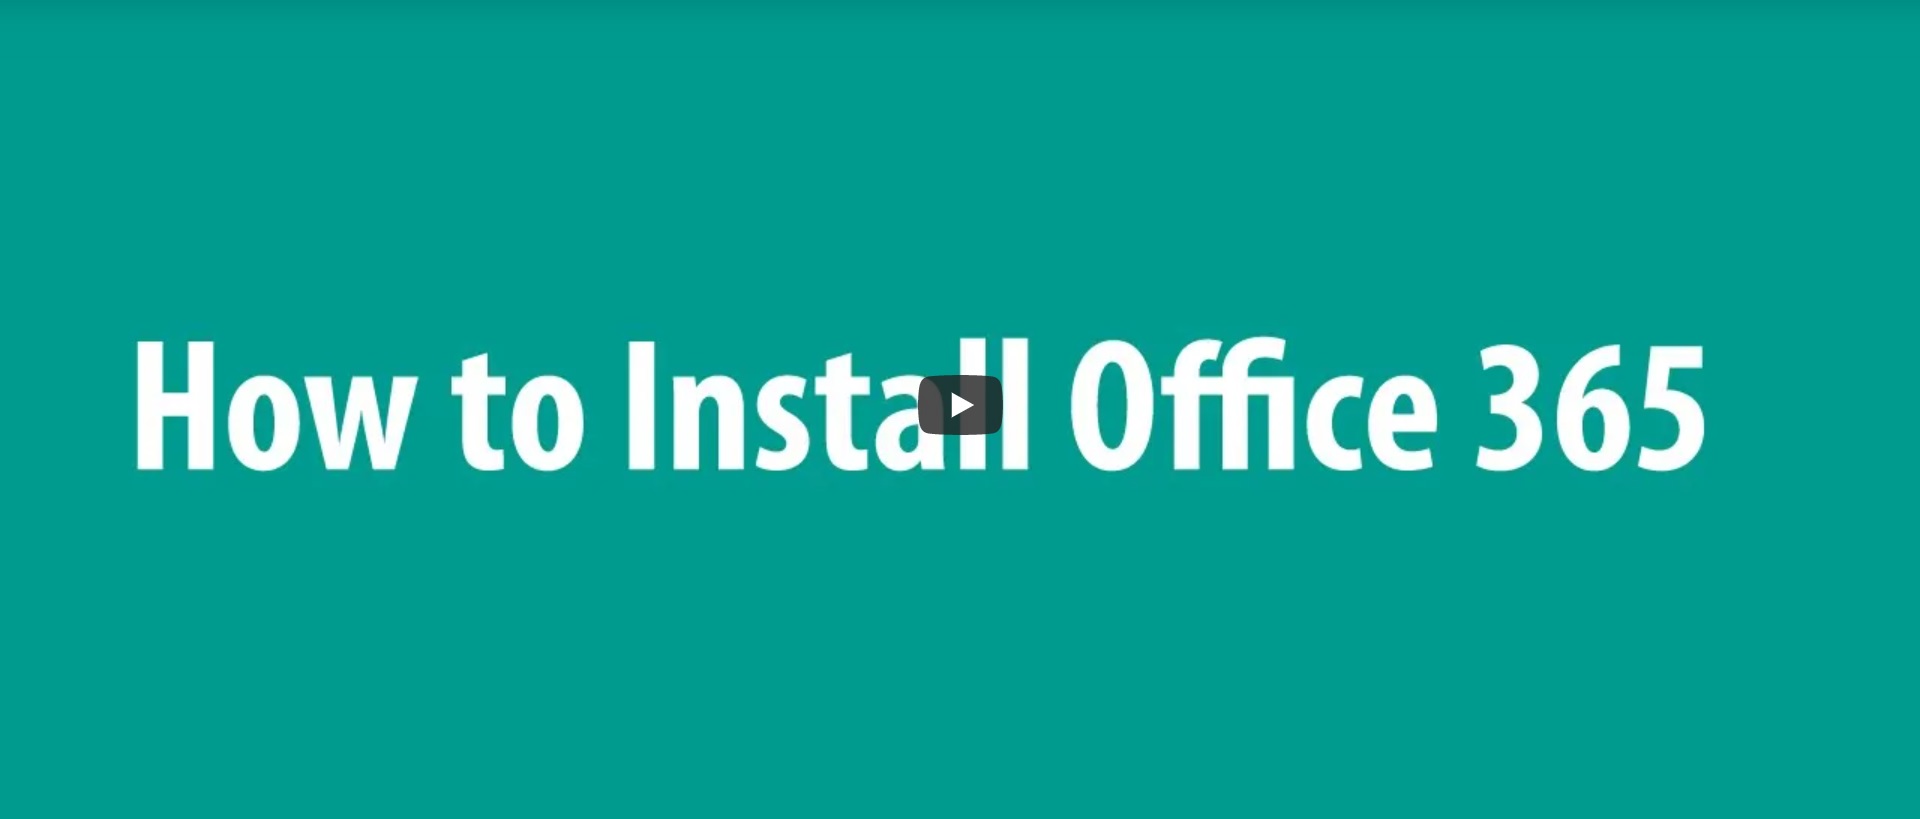 How to Install Office 365